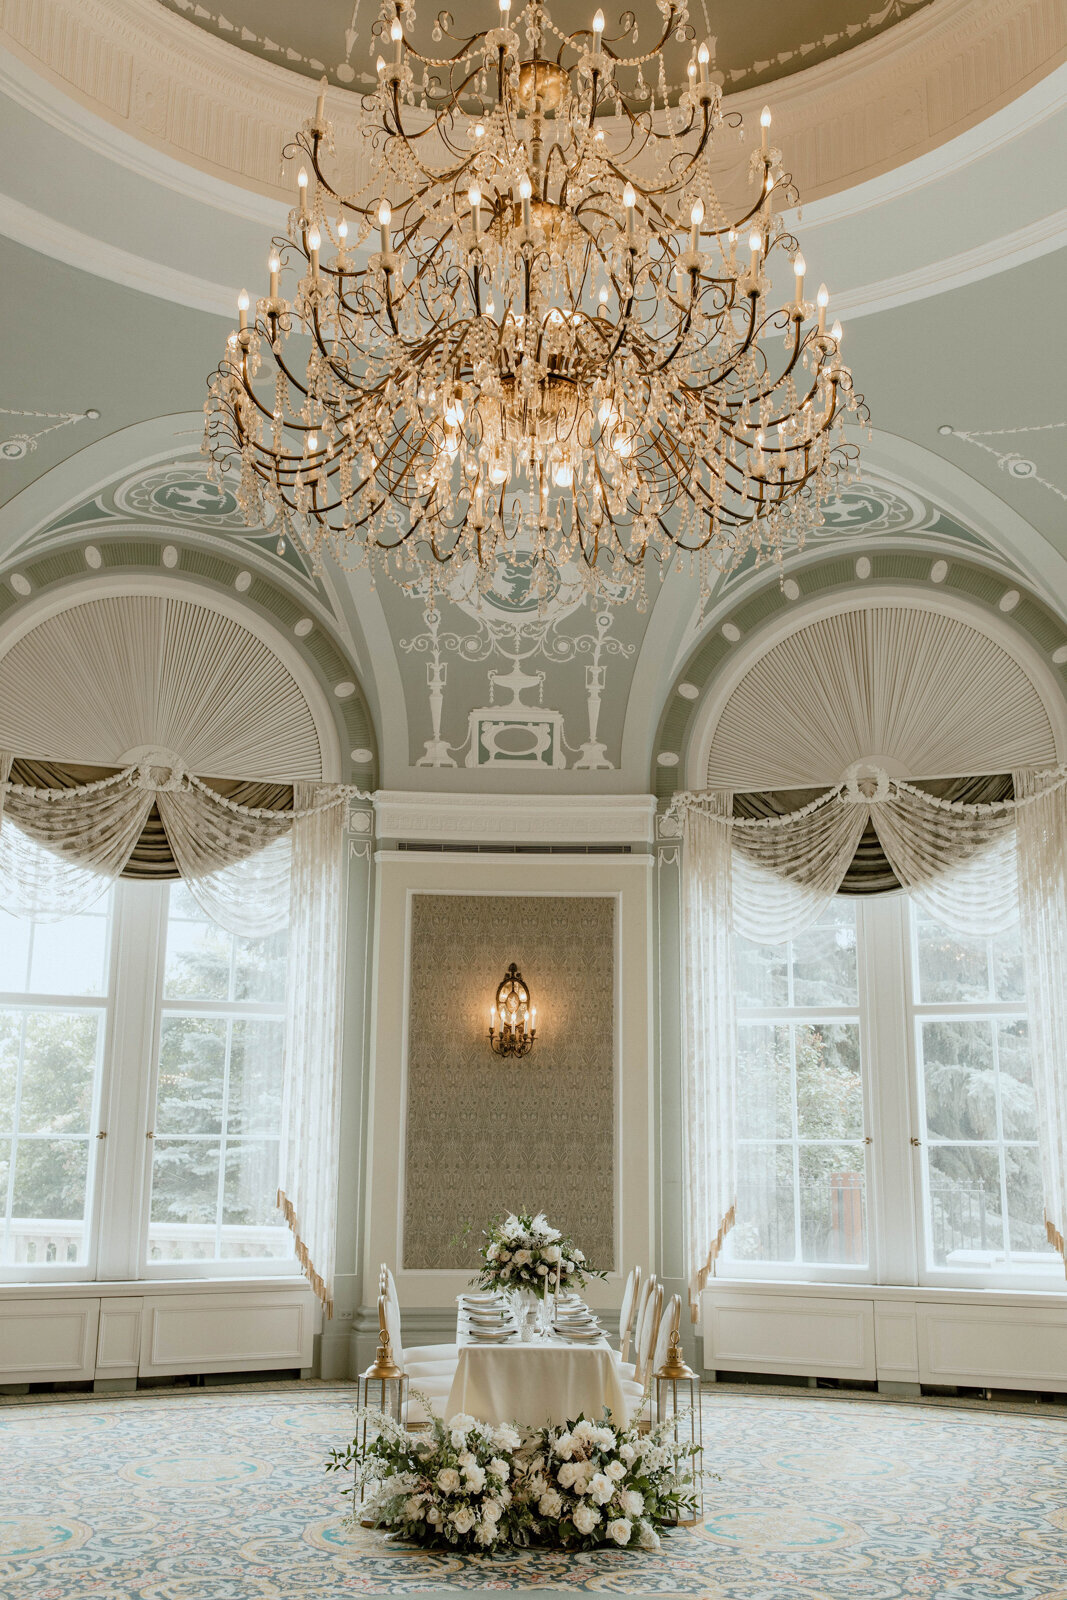 Timeless and elegant reception decor set up with stunning white florals large chandelier in the ballroom at Fairmont Hotel, classic and experienced, Edmonton wedding venue, featured on the Brontë Bride Vendor Guide.